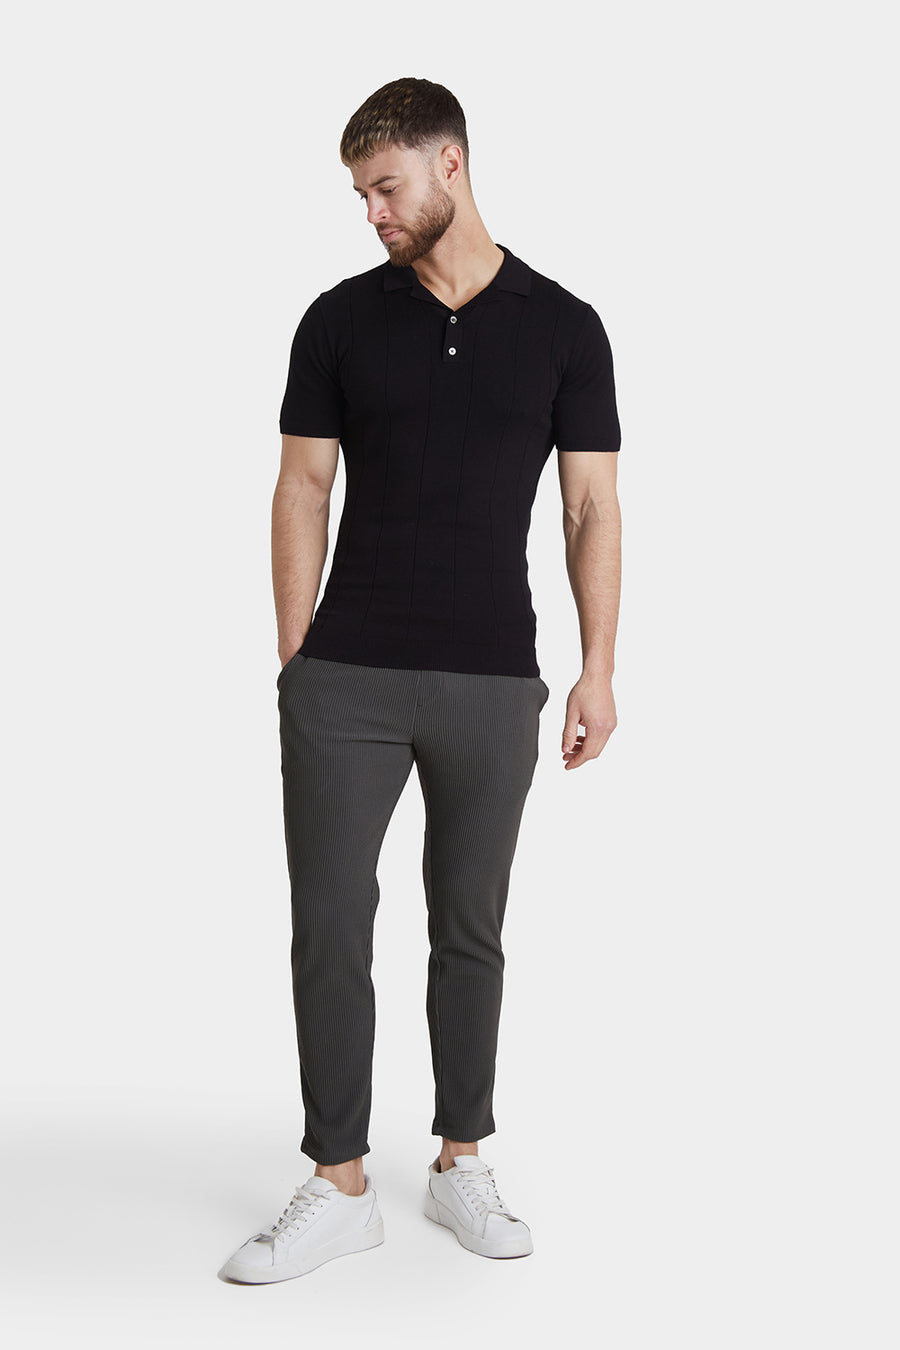 Ribbed Knitted Polo in Black - TAILORED ATHLETE - USA